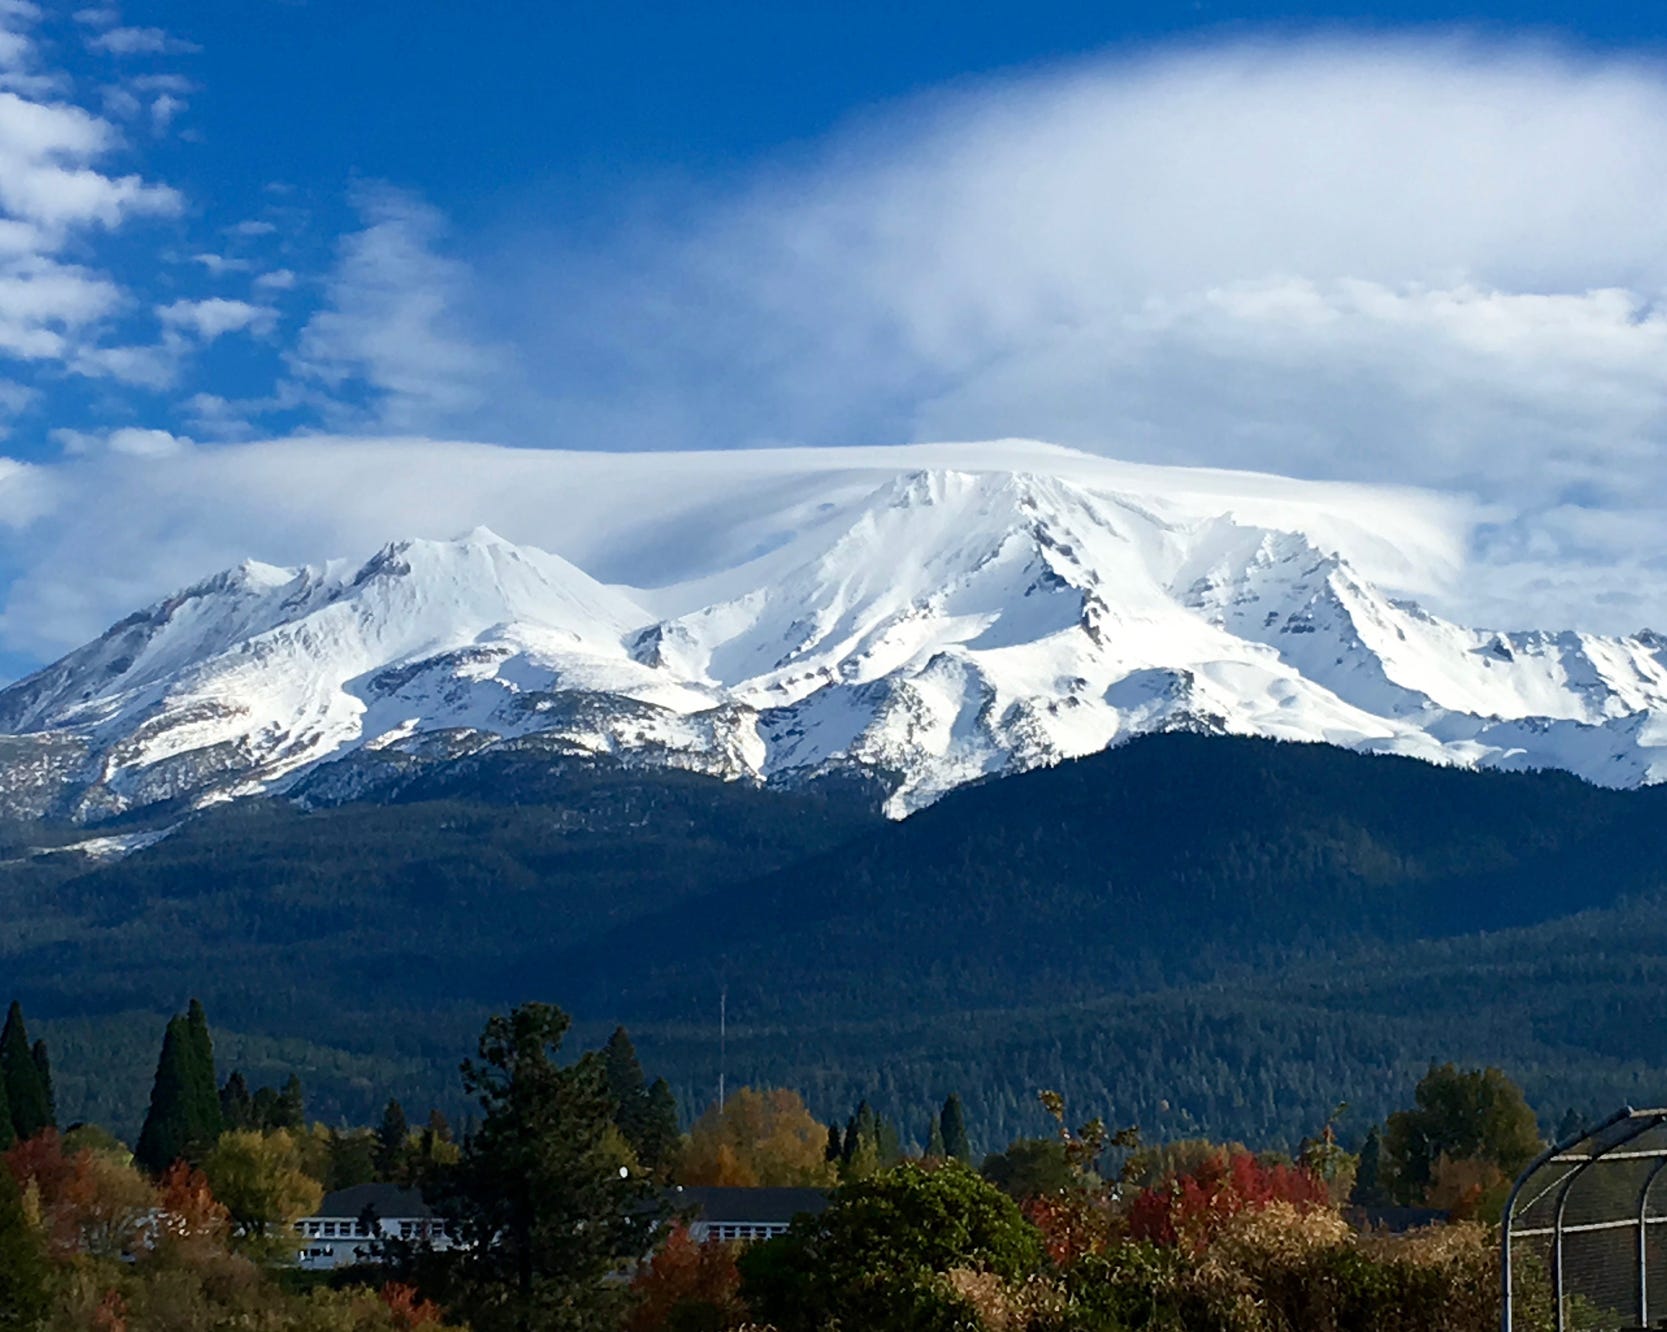 A lenticular cloud hovers over Mt. Shasta in the fall of 2016 in this photo by Jean Nels.